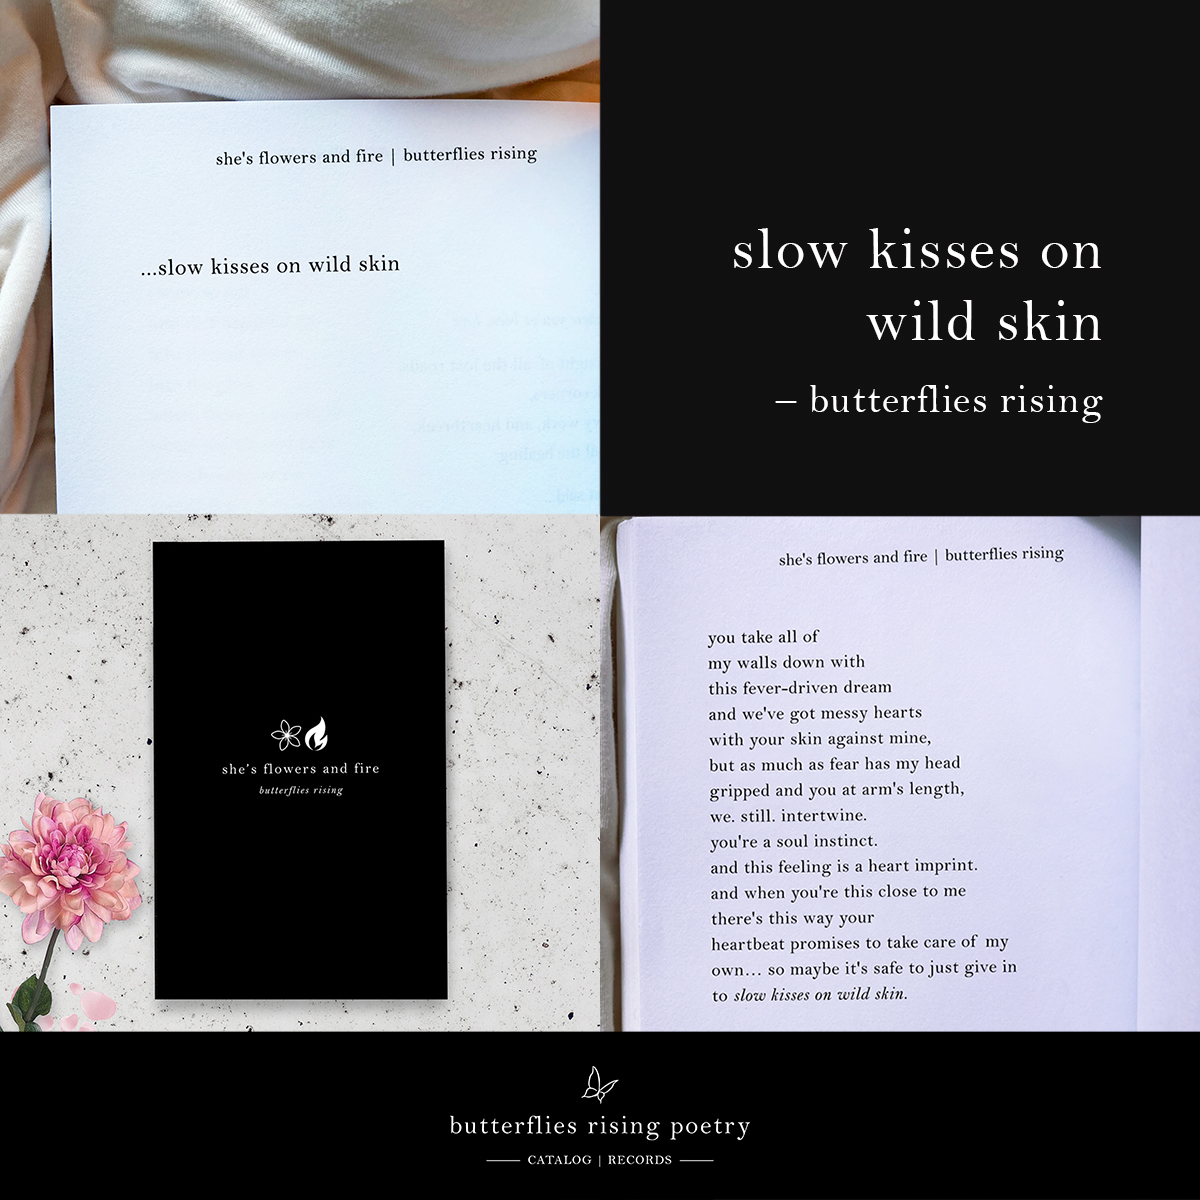 slow kisses on wild skin'</a> is in her book 'she's flowers and fire' and was originally published on the butterflies rising poetry blog